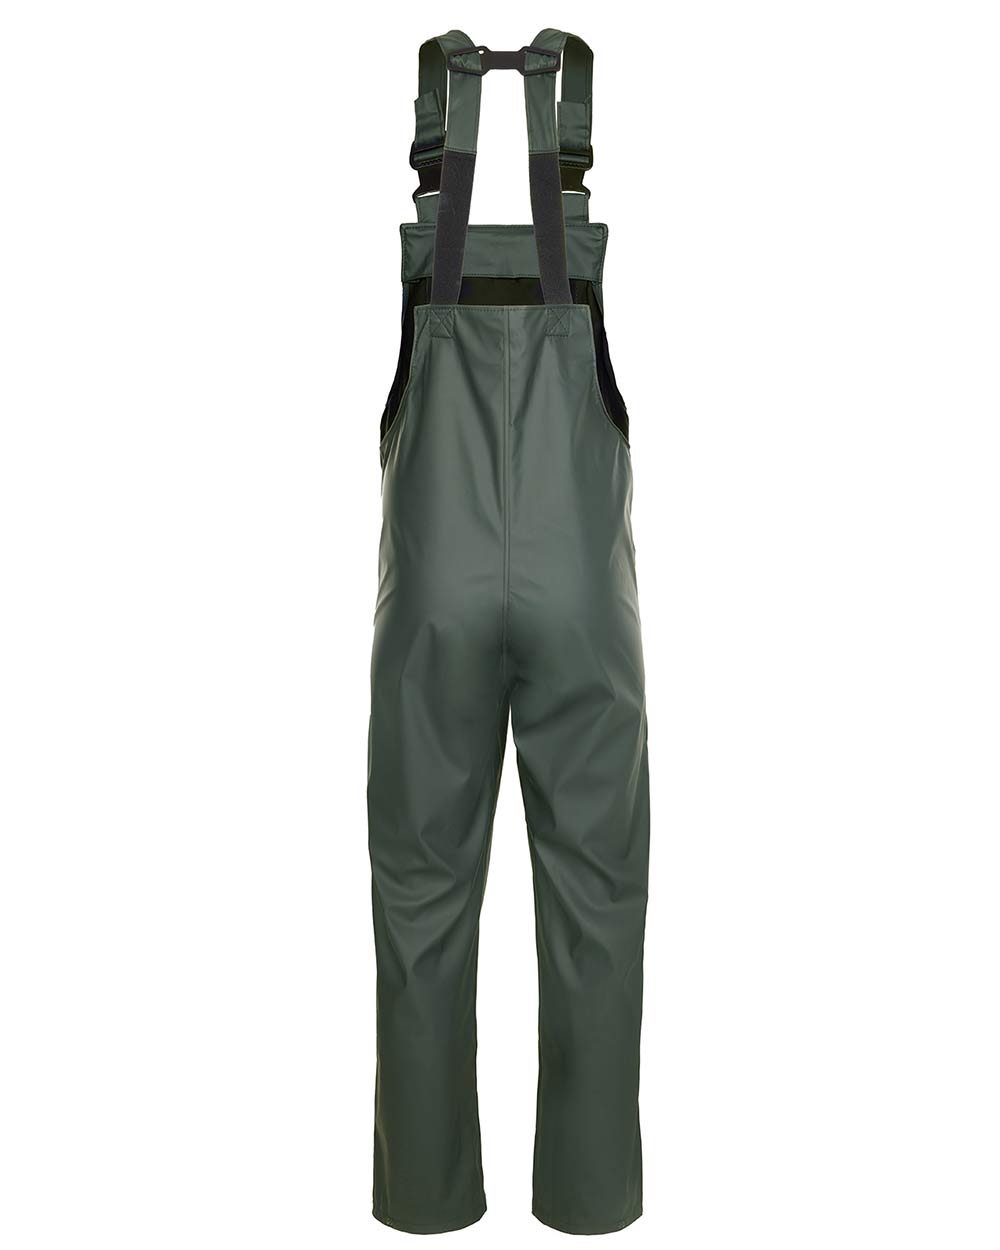 bACK vIEW Fort Airflex Waterproof Breathable Bib and Brace Overalls in Olive 